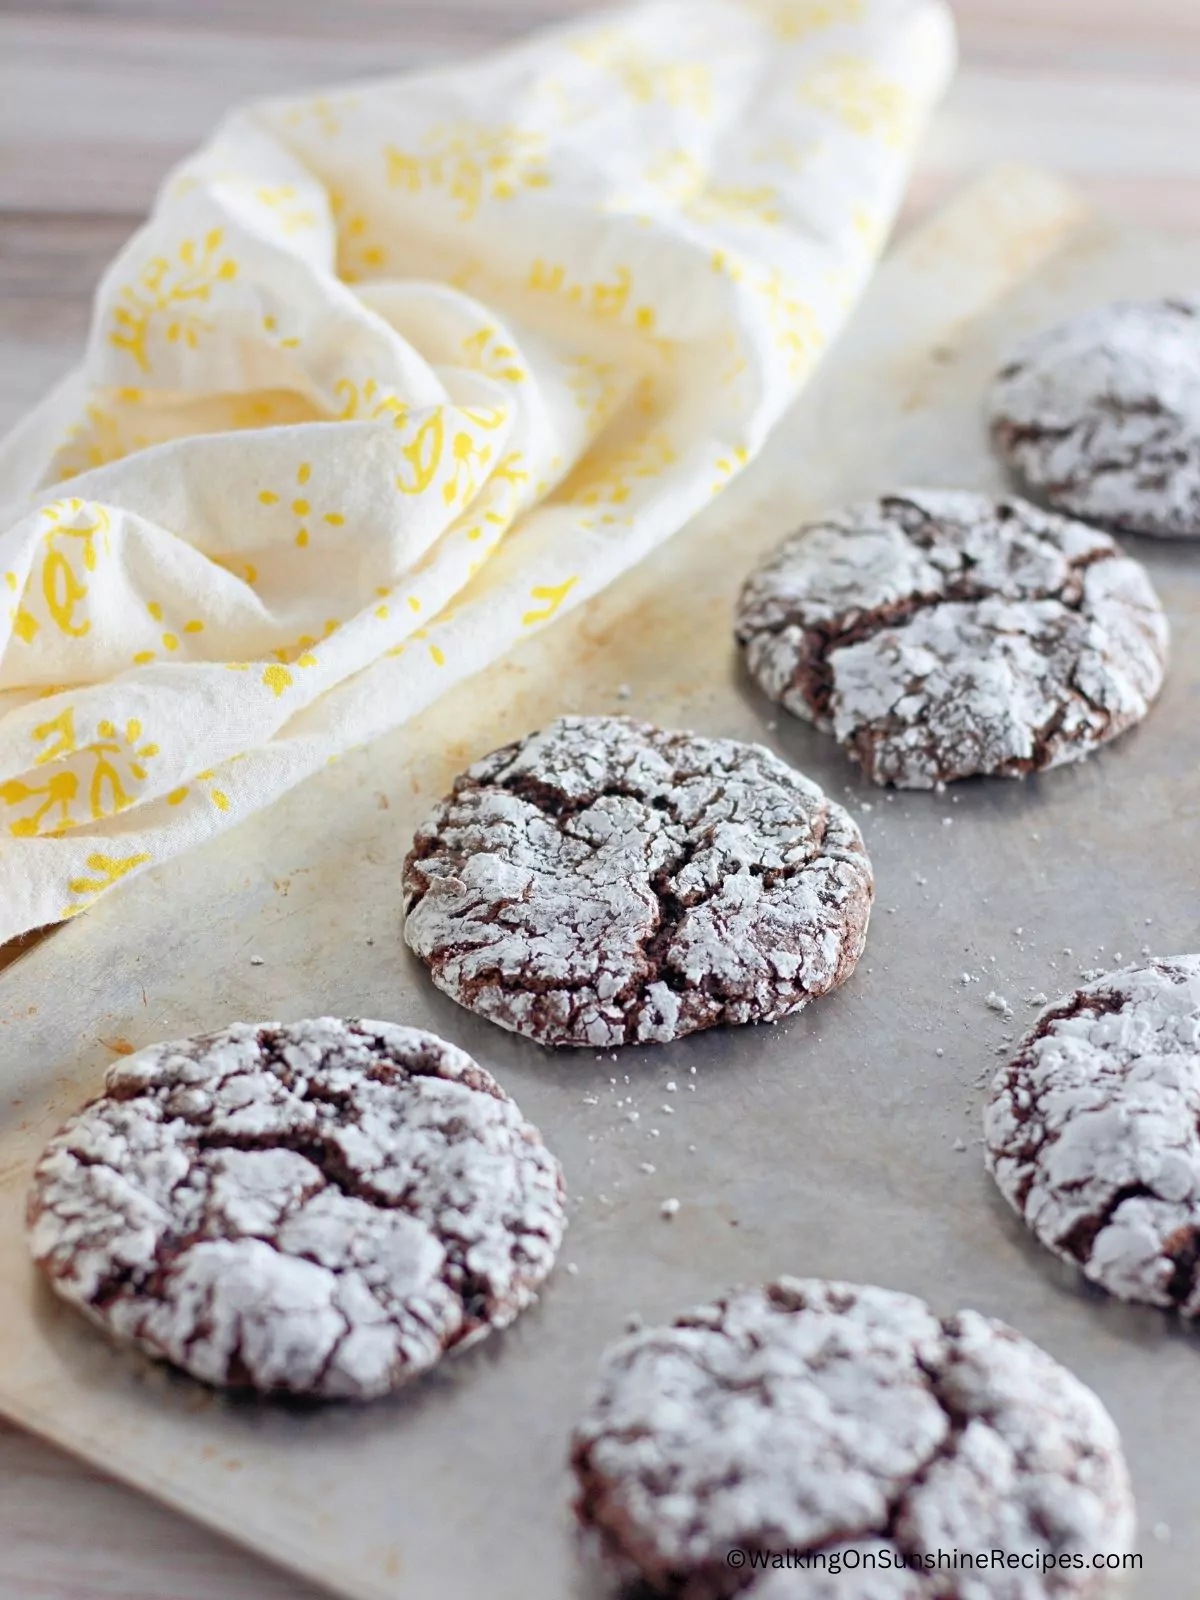 Chocolate cake mix cookies on baking tray with yellow dish towel.